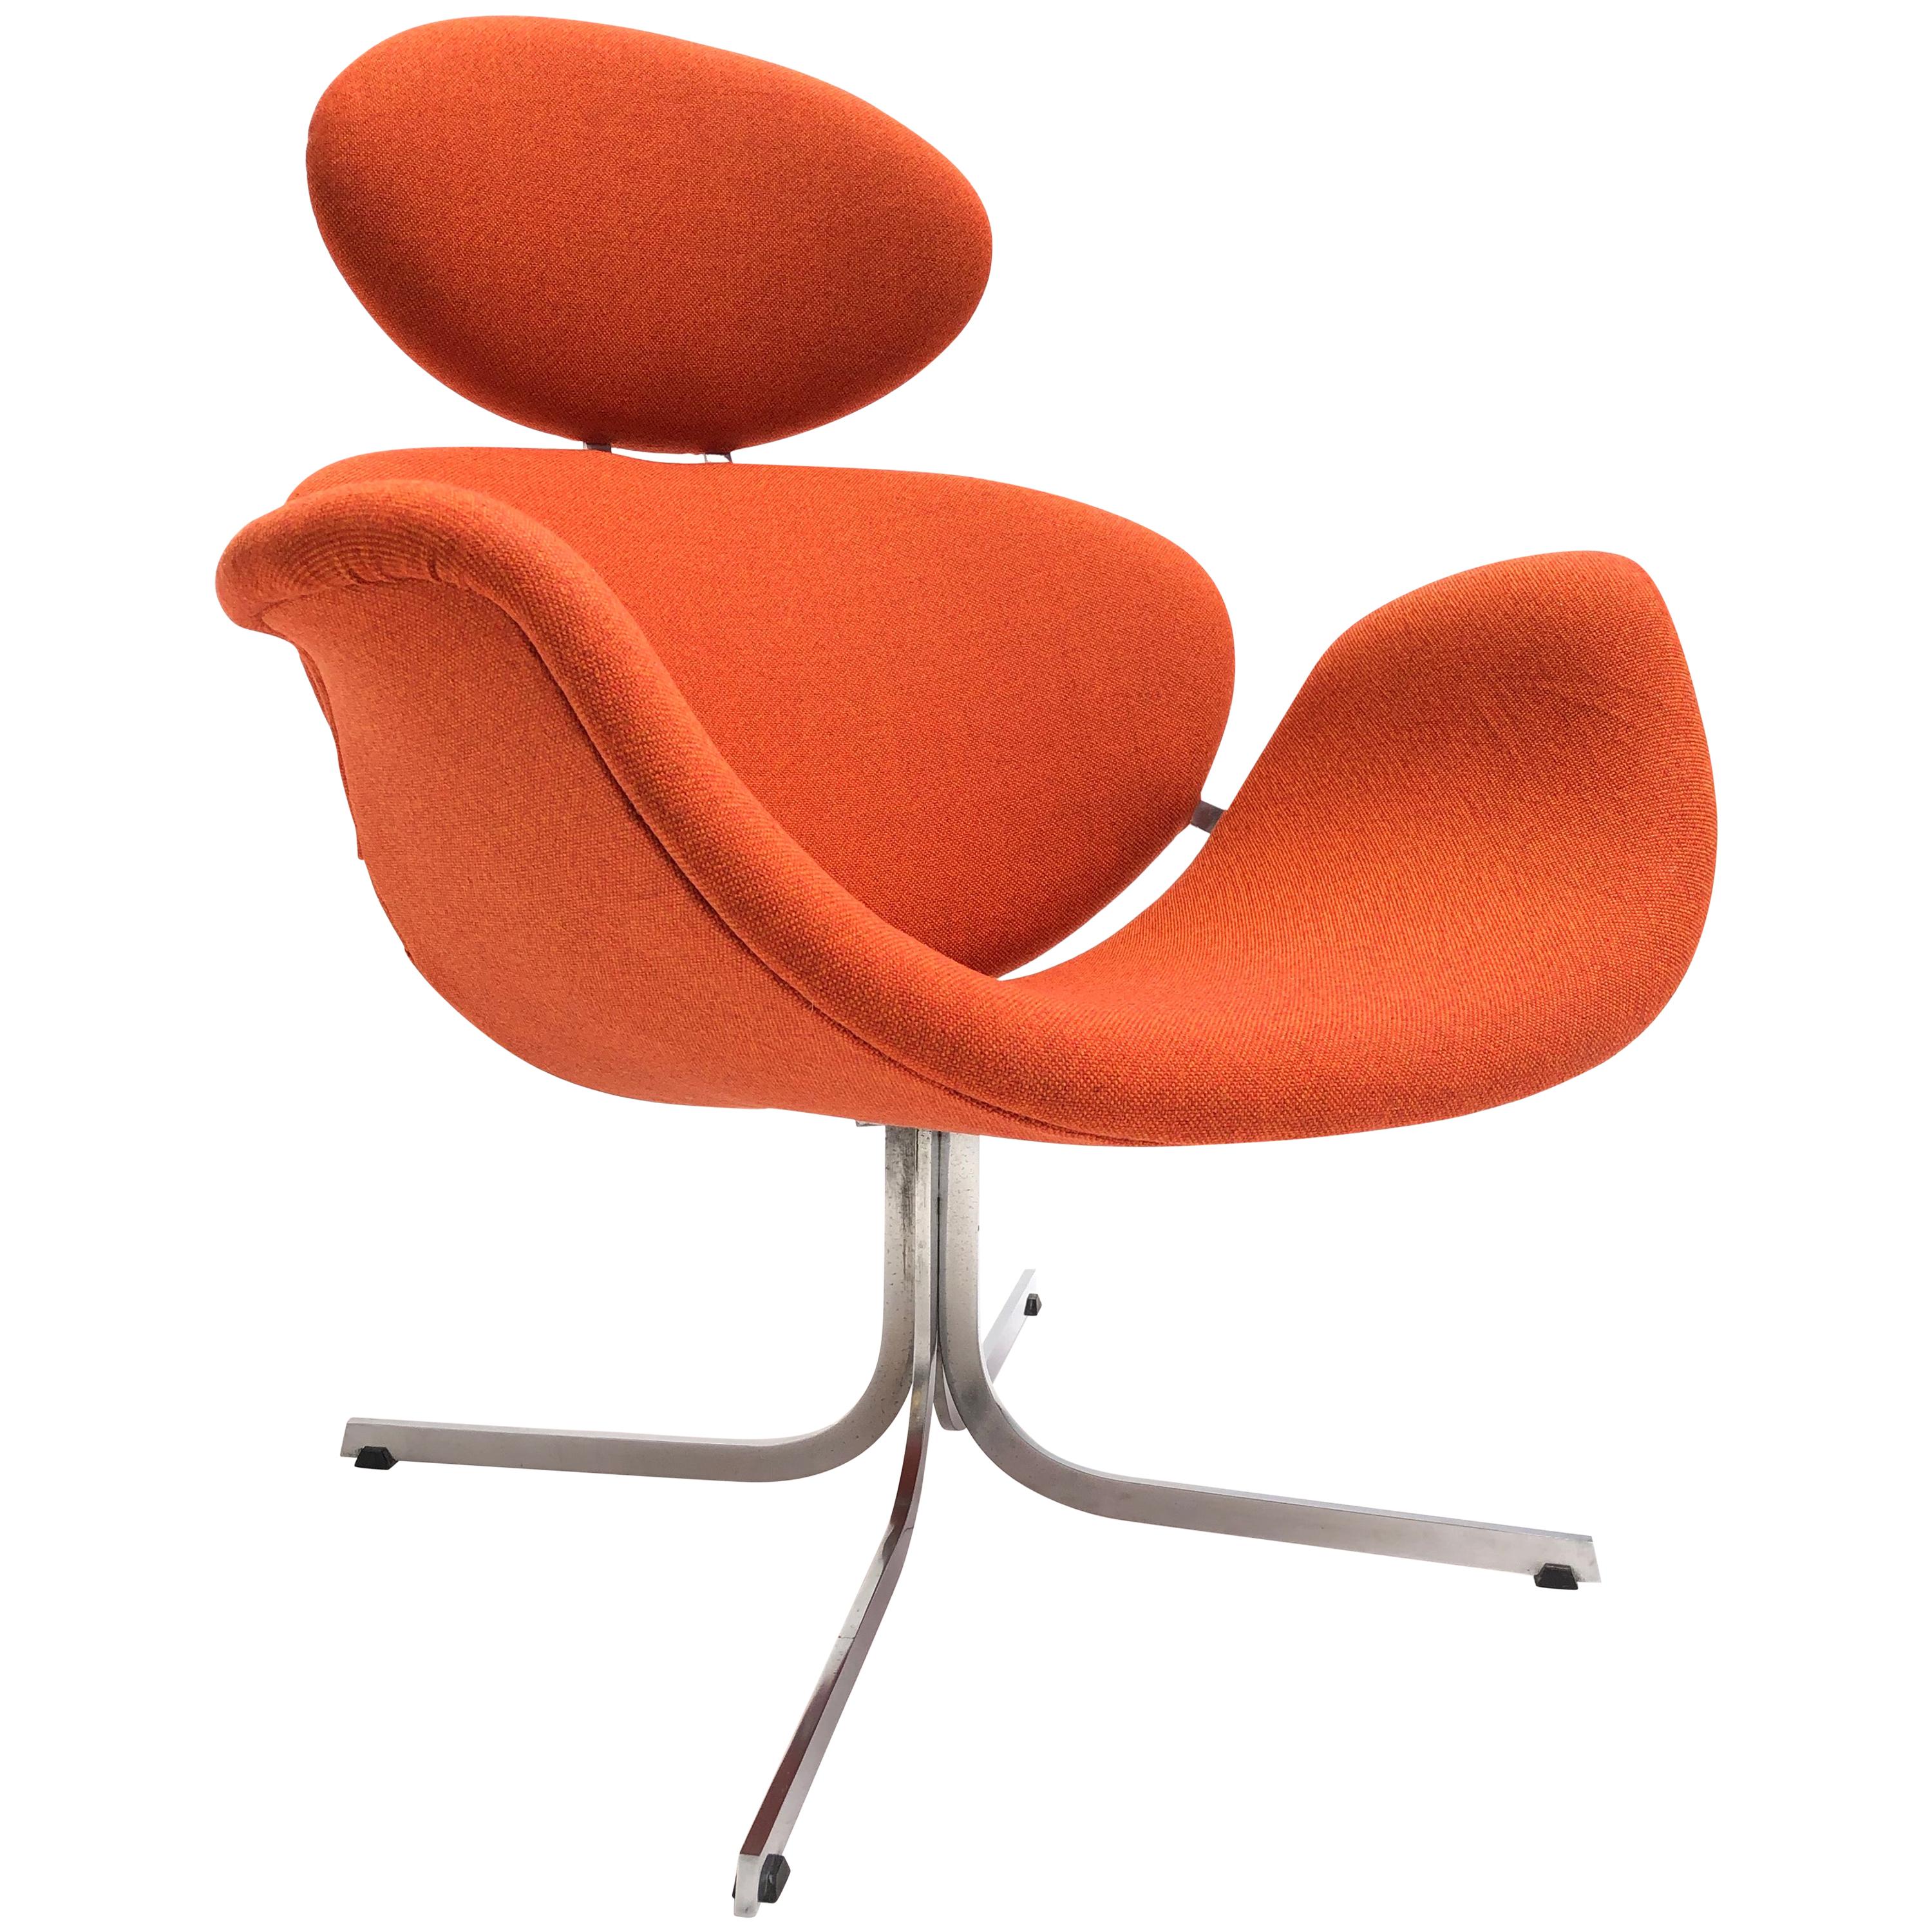 First Edition "Big Tulip" Lounge Chair Model F551 by Pierre Paulin Artifort 1959